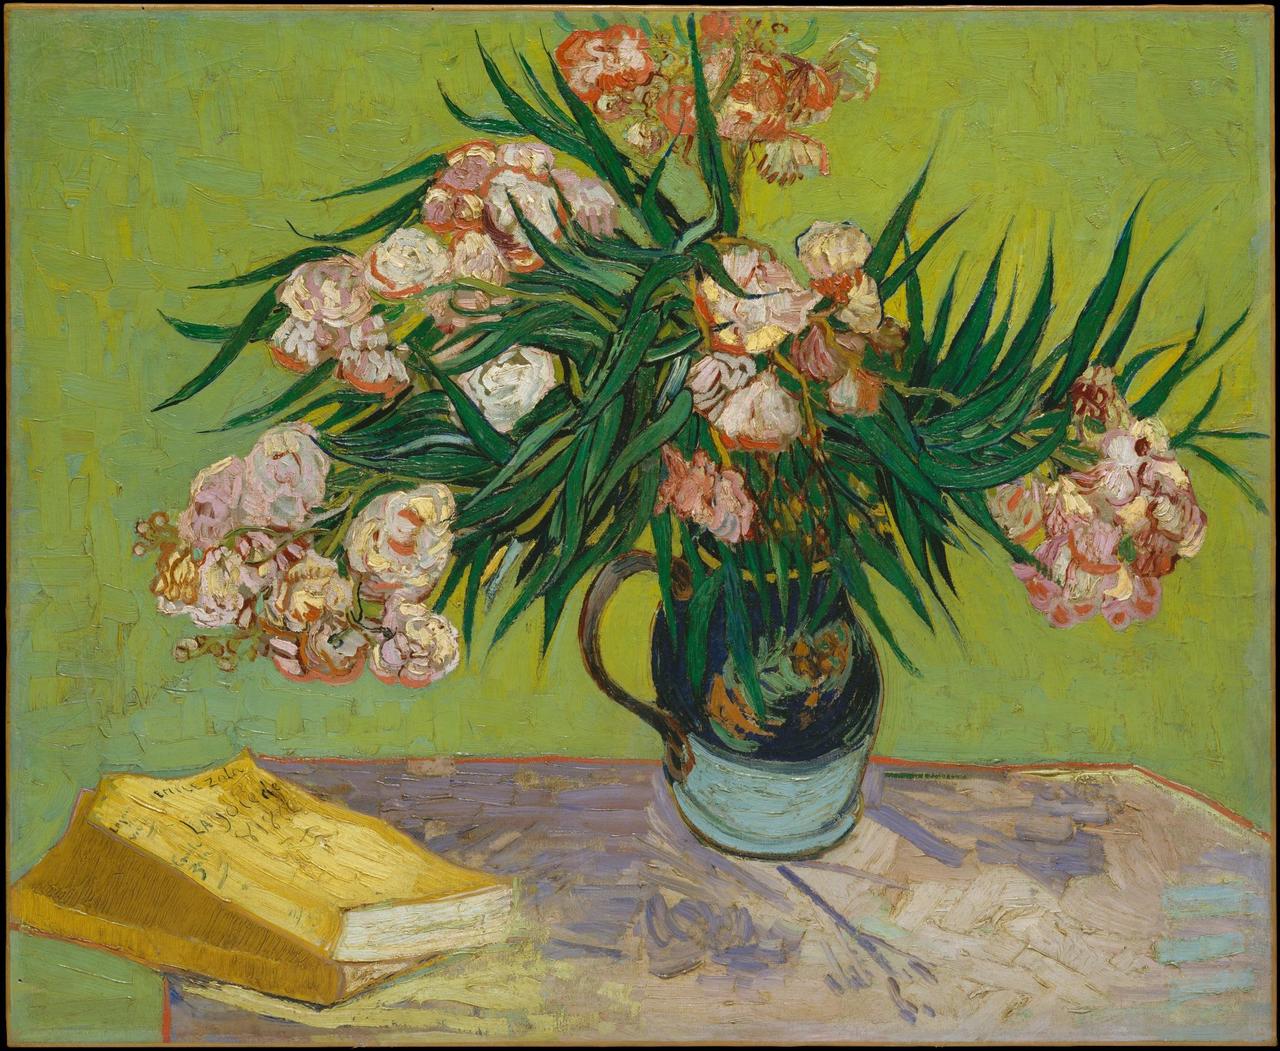 The flower offered of itself
And eloquently spoke
Of Gods
#art #VanGogh http://t.co/KM6cUdv5xW